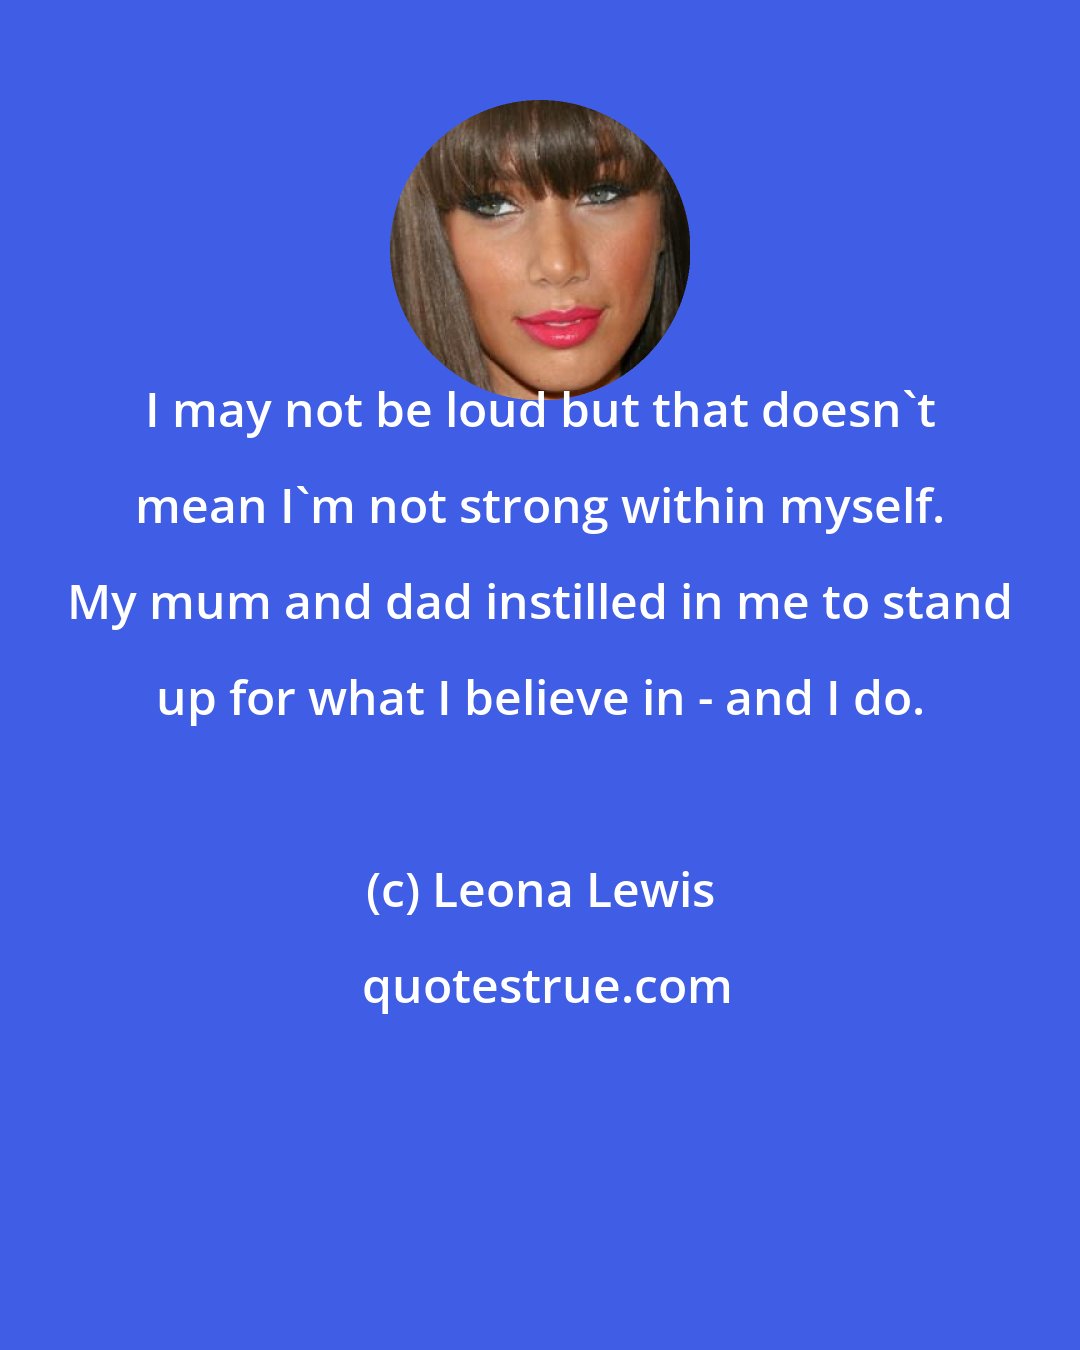 Leona Lewis: I may not be loud but that doesn't mean I'm not strong within myself. My mum and dad instilled in me to stand up for what I believe in - and I do.